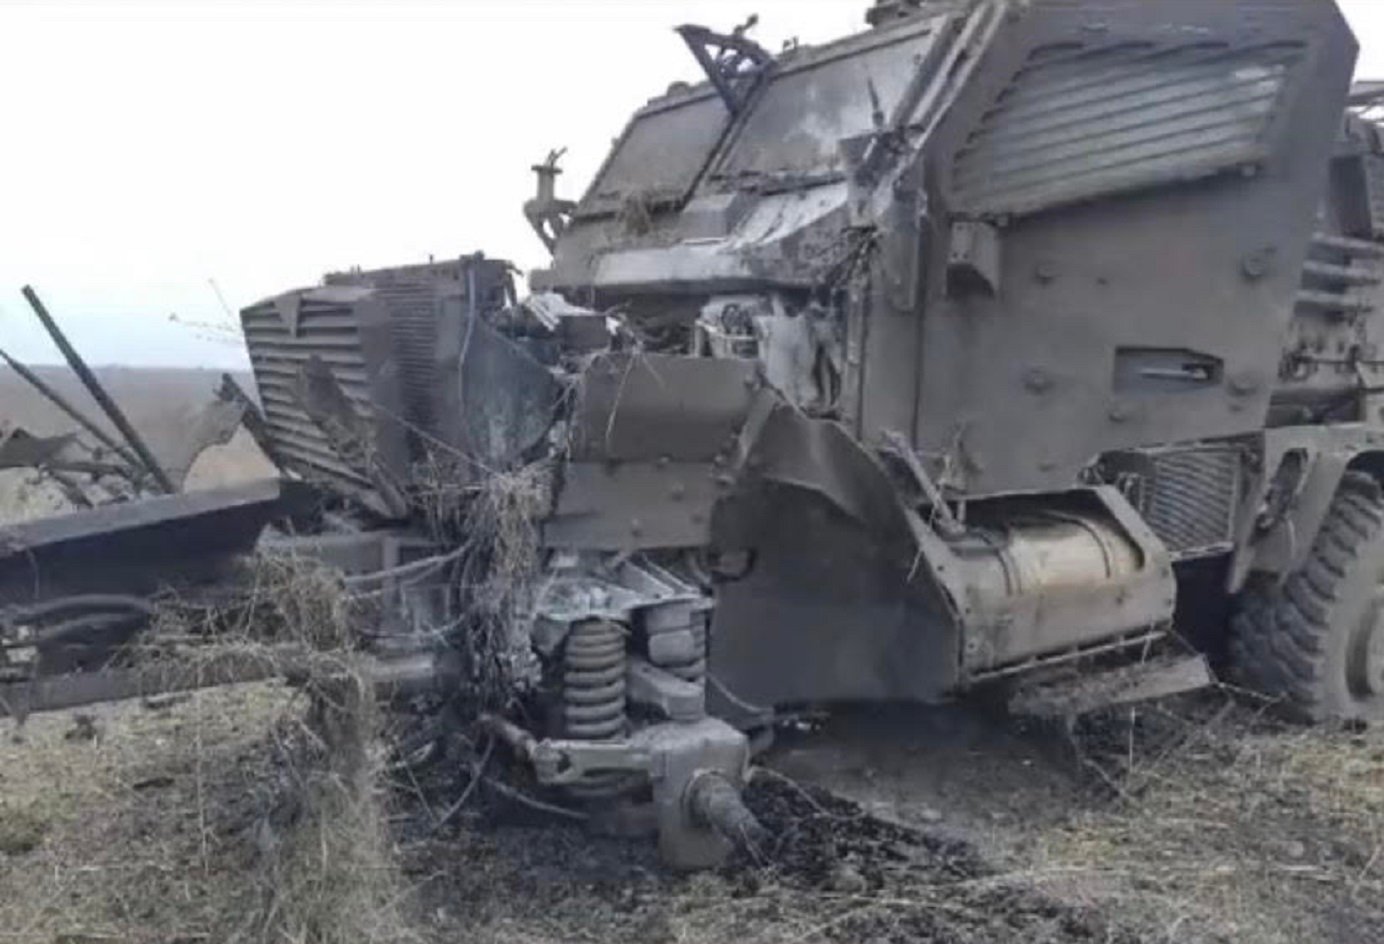 Ukrainian Soldiers survive after armored vehicle hit mine